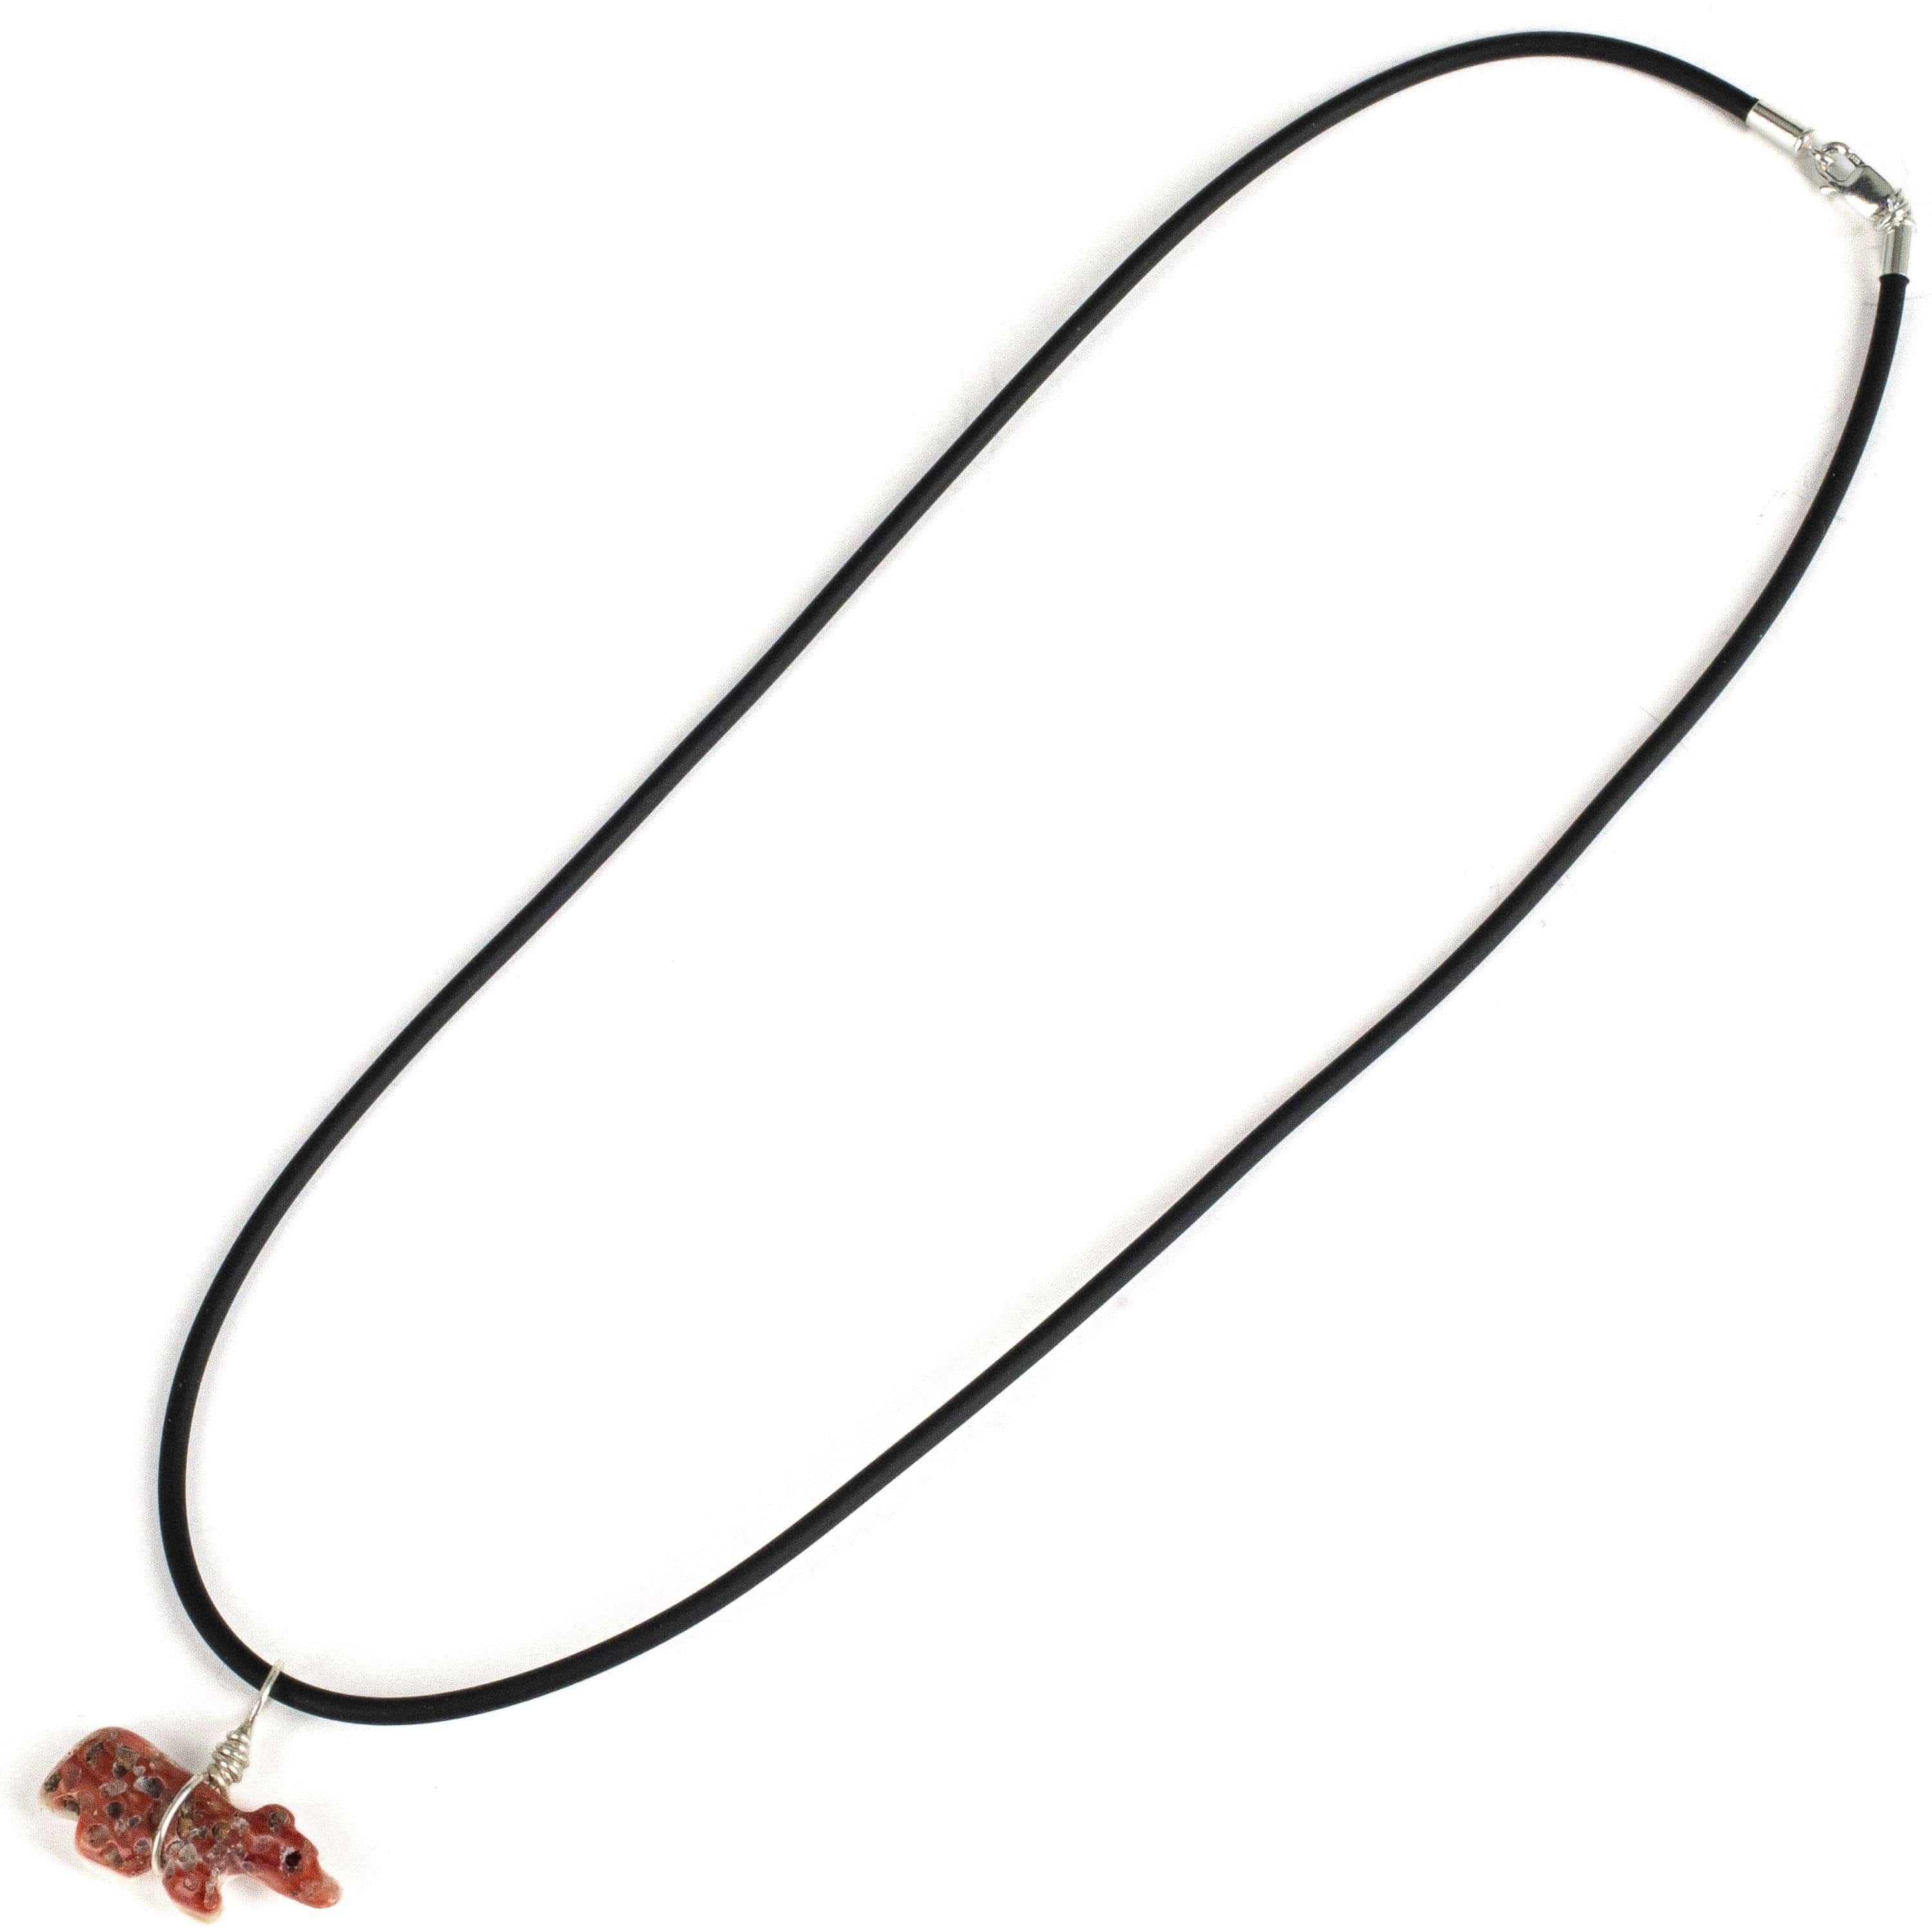 Kalifano Native American Jewelry Spiny Oyster Shell Bear Fetish Carving USA Native American Made Necklace with Leather Cord NAN80.002